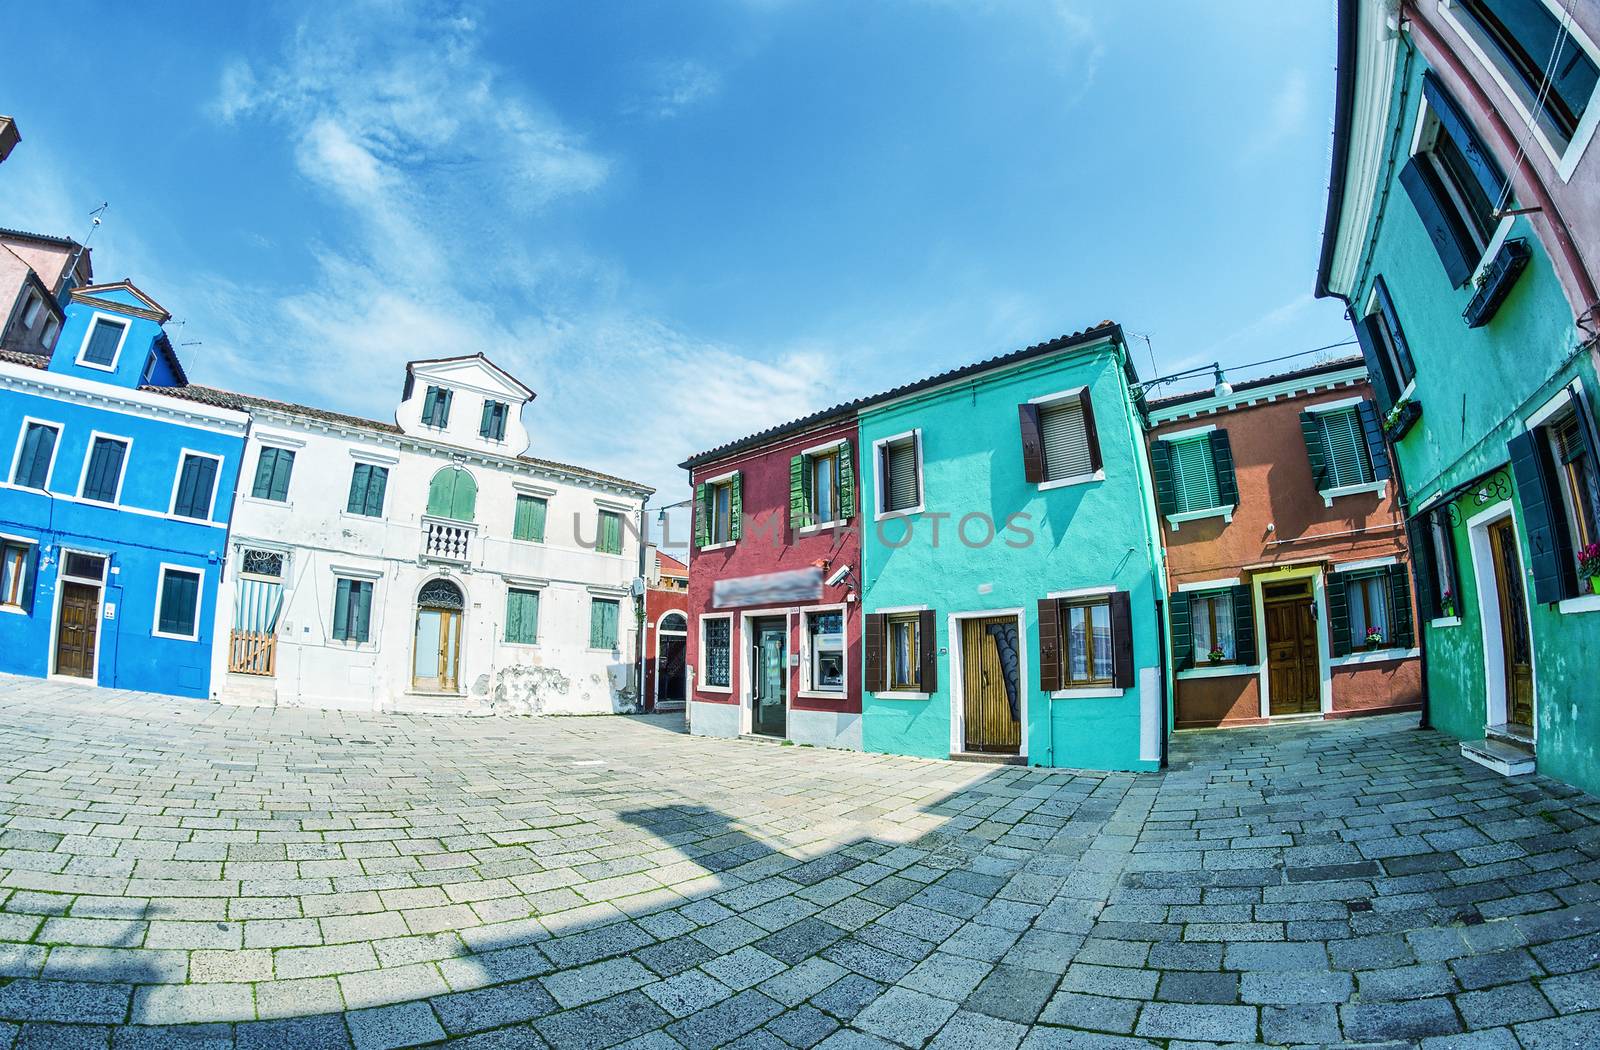 Colourful Homes of Burano - Venice, Italy by jovannig